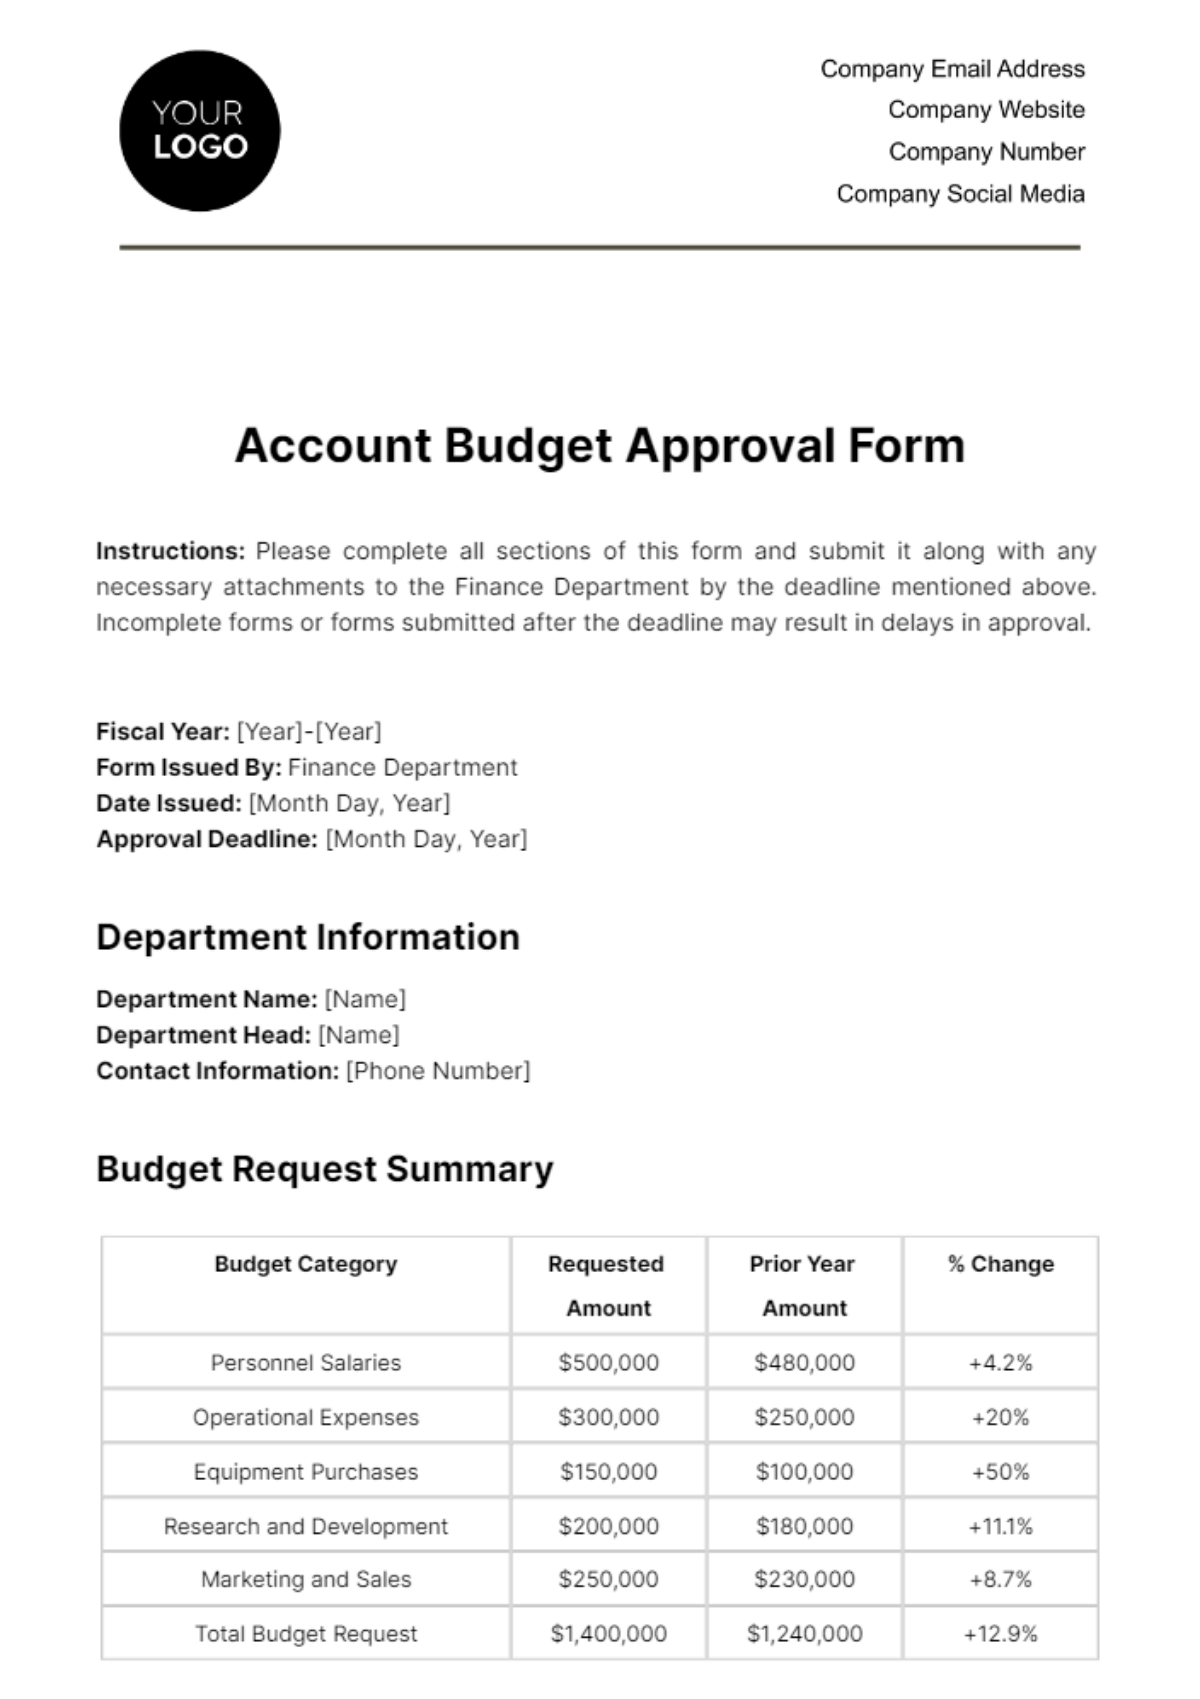 Account Budget Approval Form Template